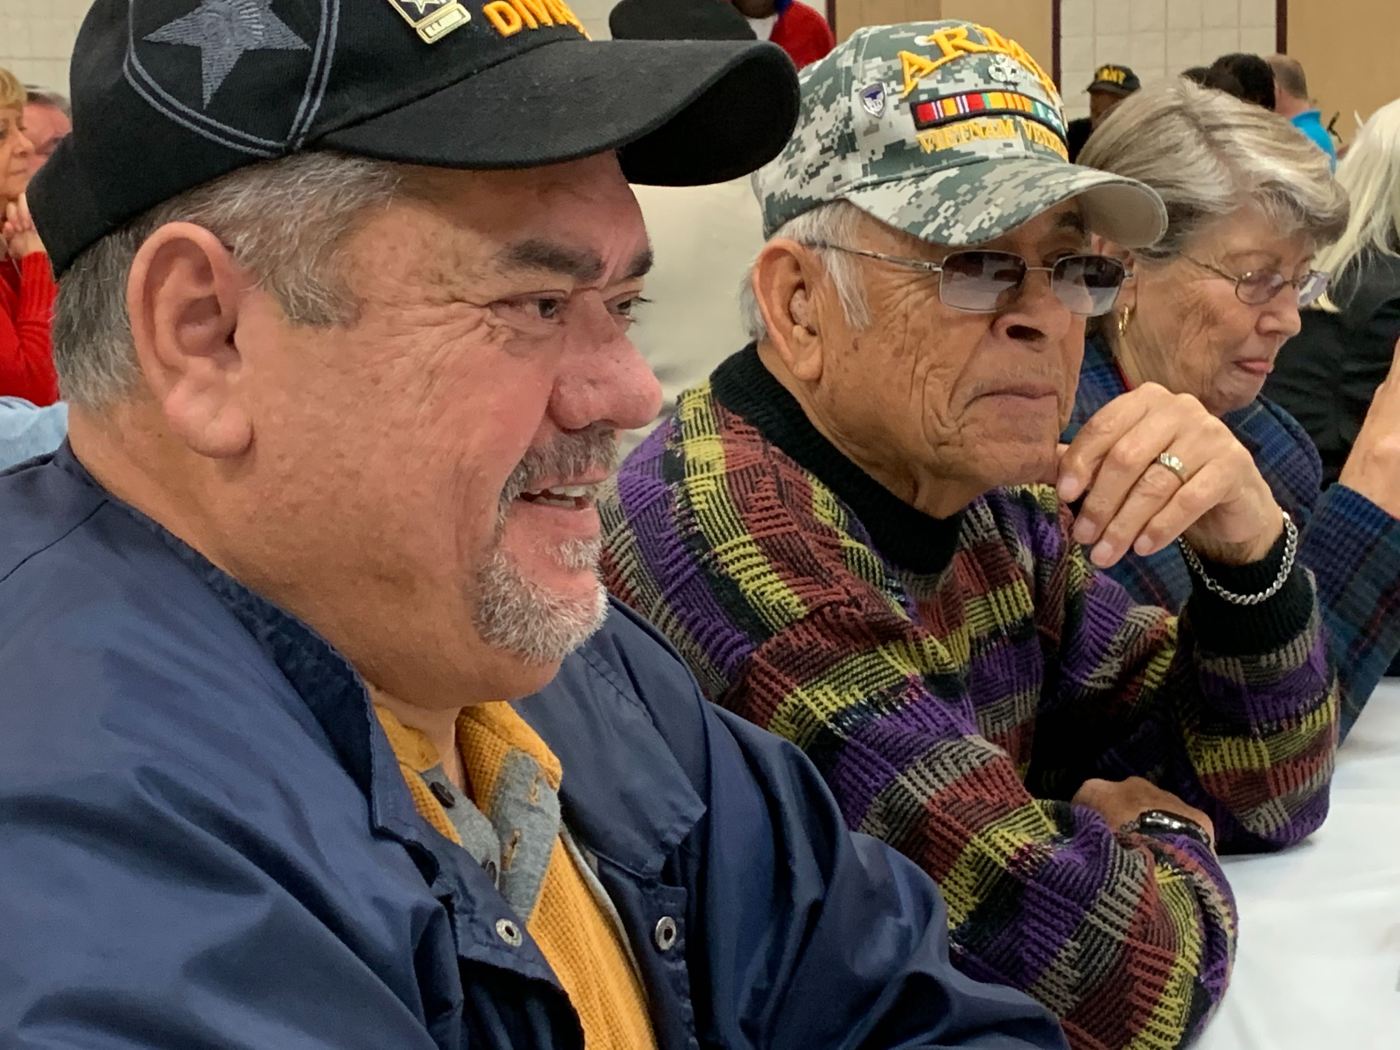 Veterans talk at the Christmas luncheon put on by the Fayetteville Vet Center Dec. 13, 2019.